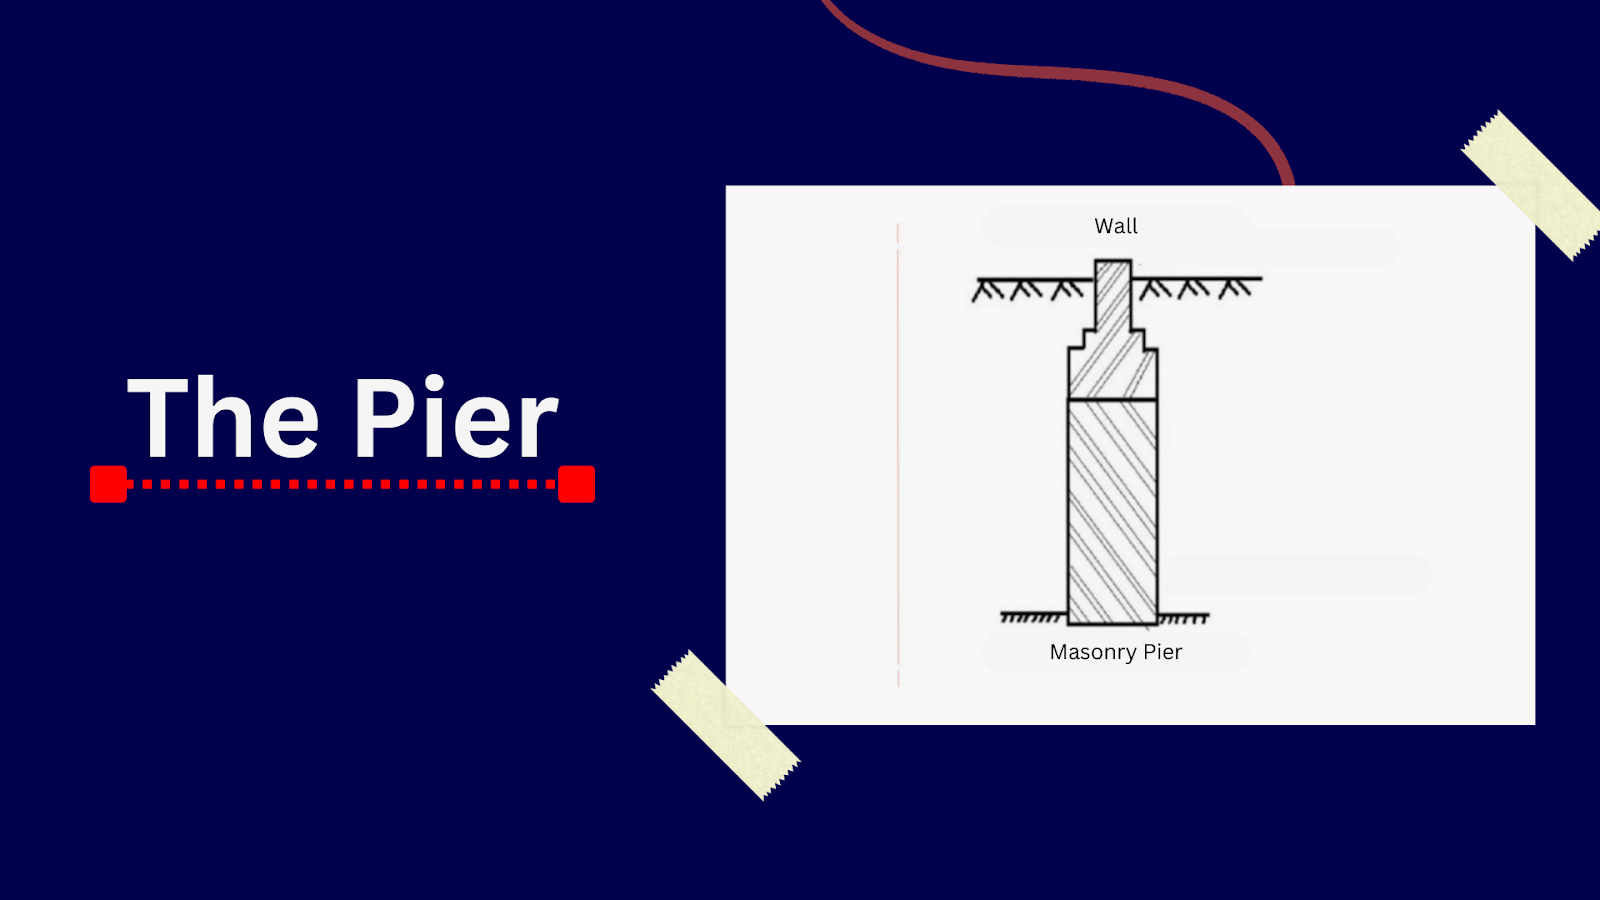 difference between piles and piers